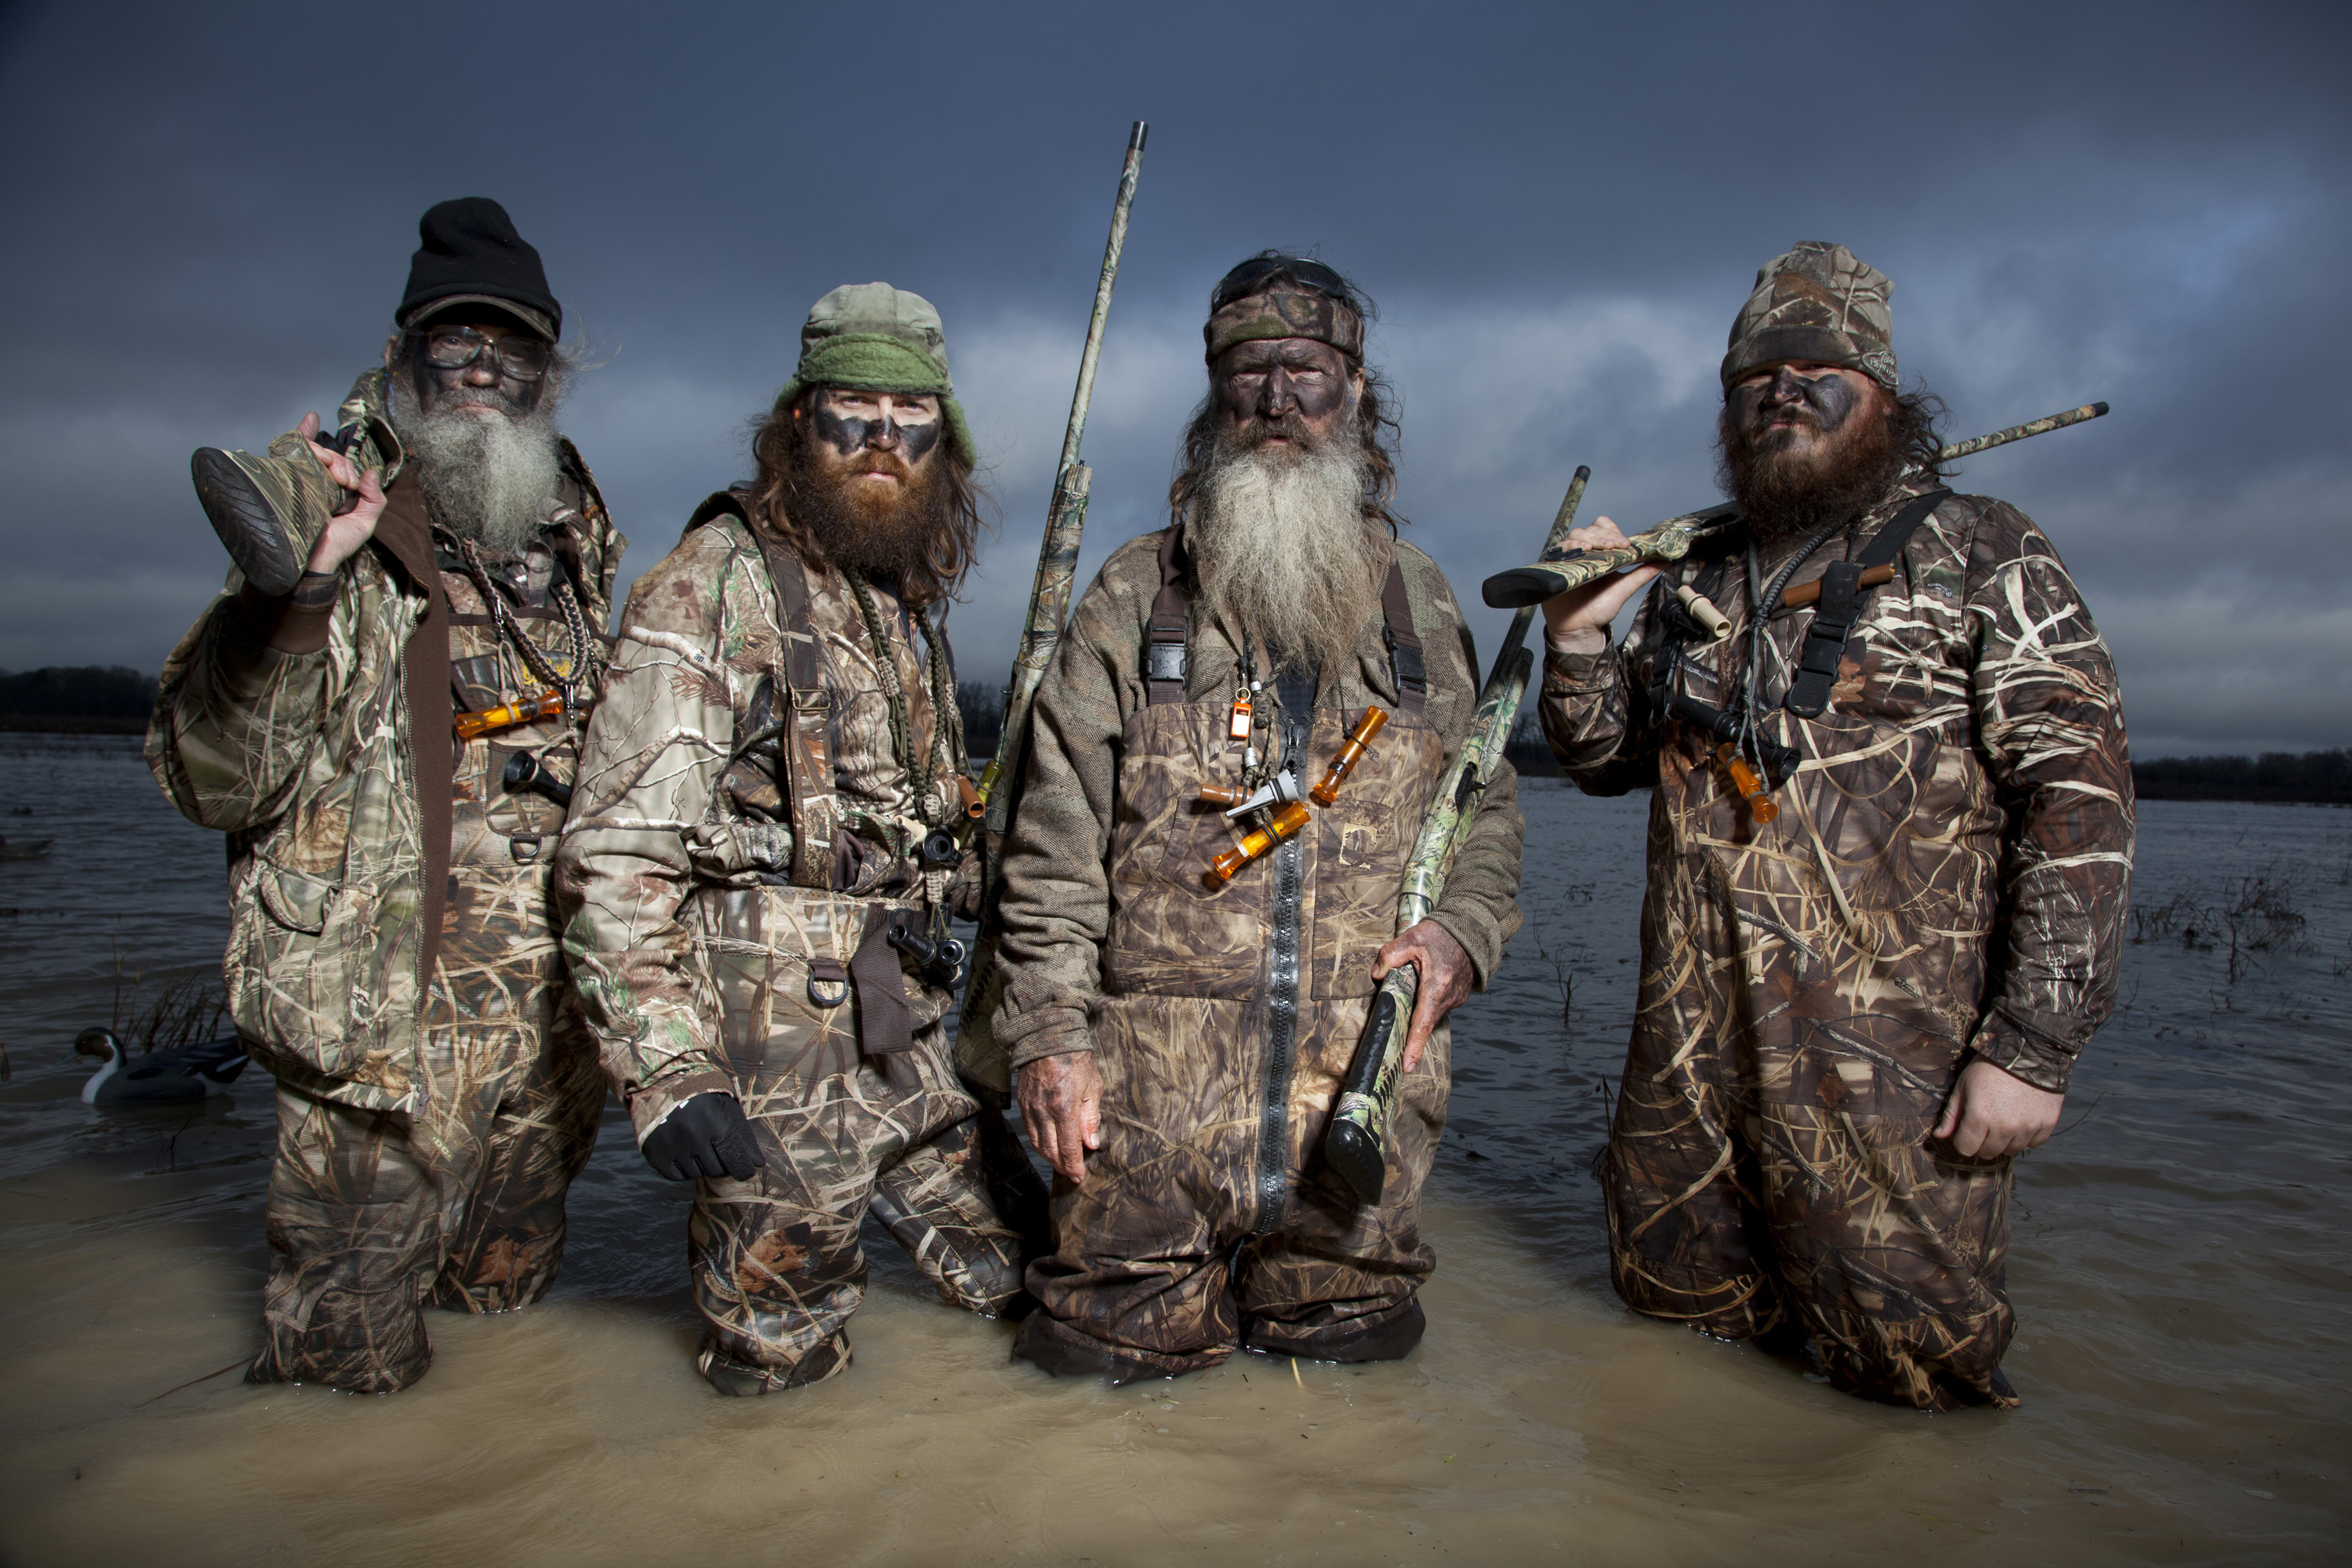 Duck Dynasty Drama Proves Americans Waste A Lot of Time & Are